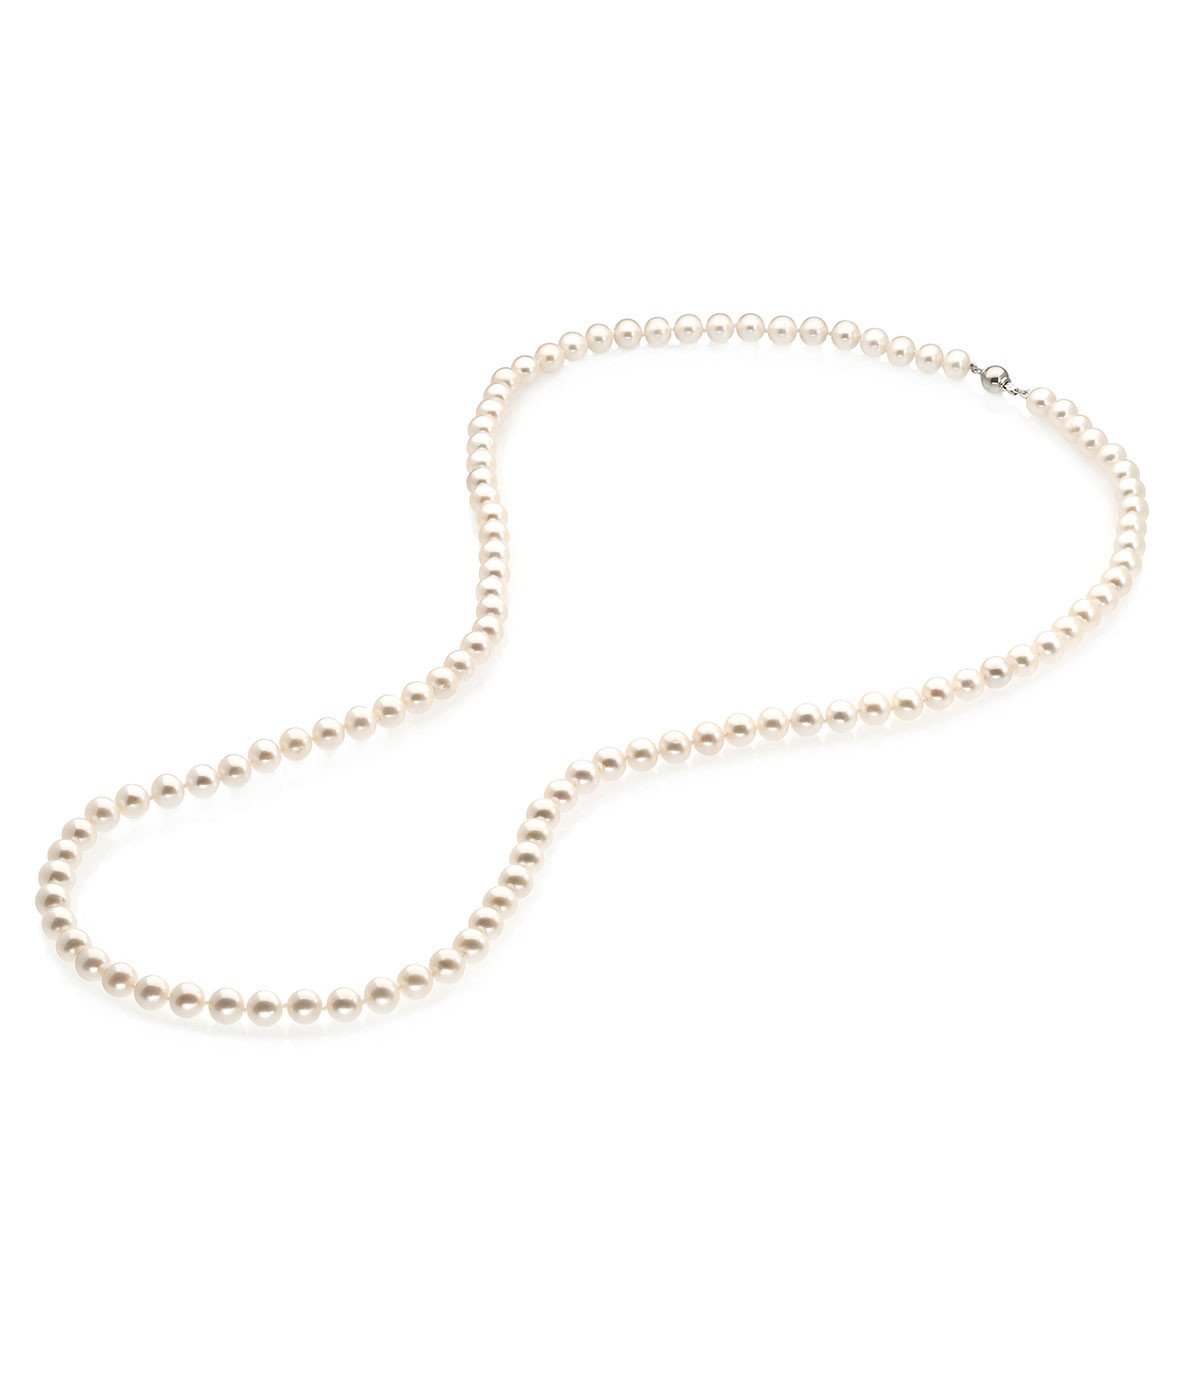 Long Pearl Necklace with Sterling Silver Ball Clasp